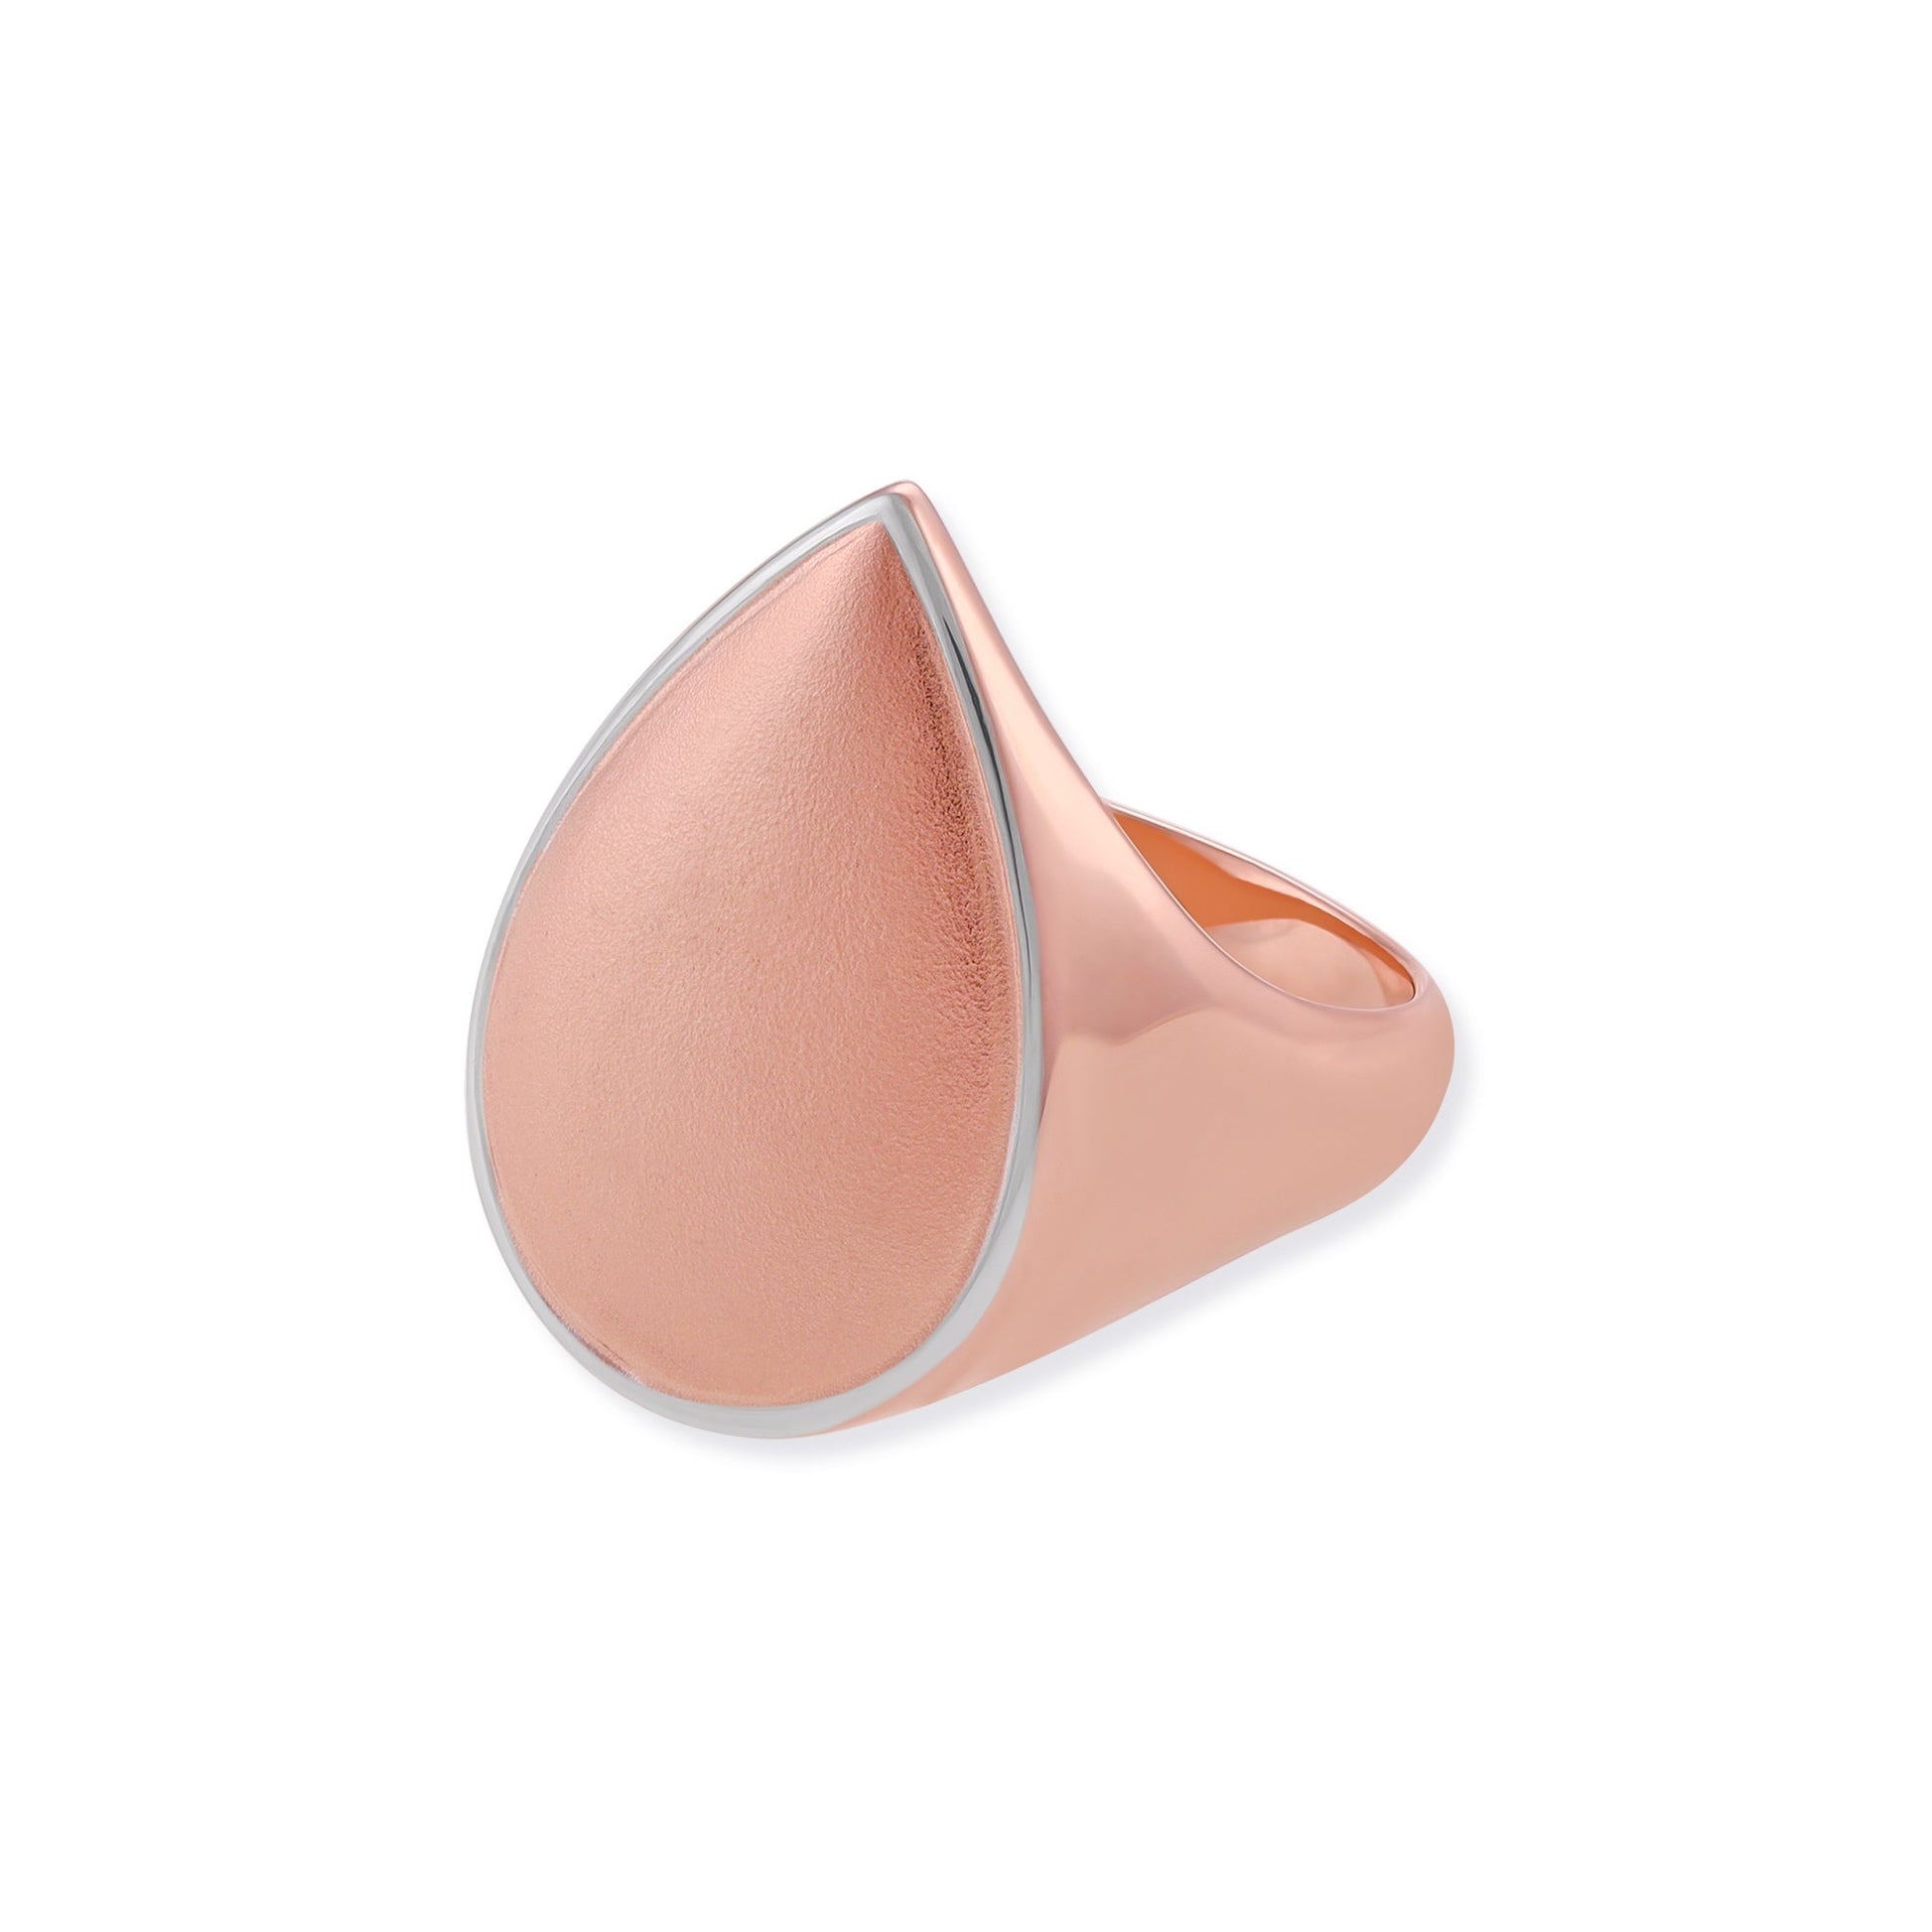 18ct 3 microns rose gold plated 925 sterling silver signet ring PRN2001 - FJewellery